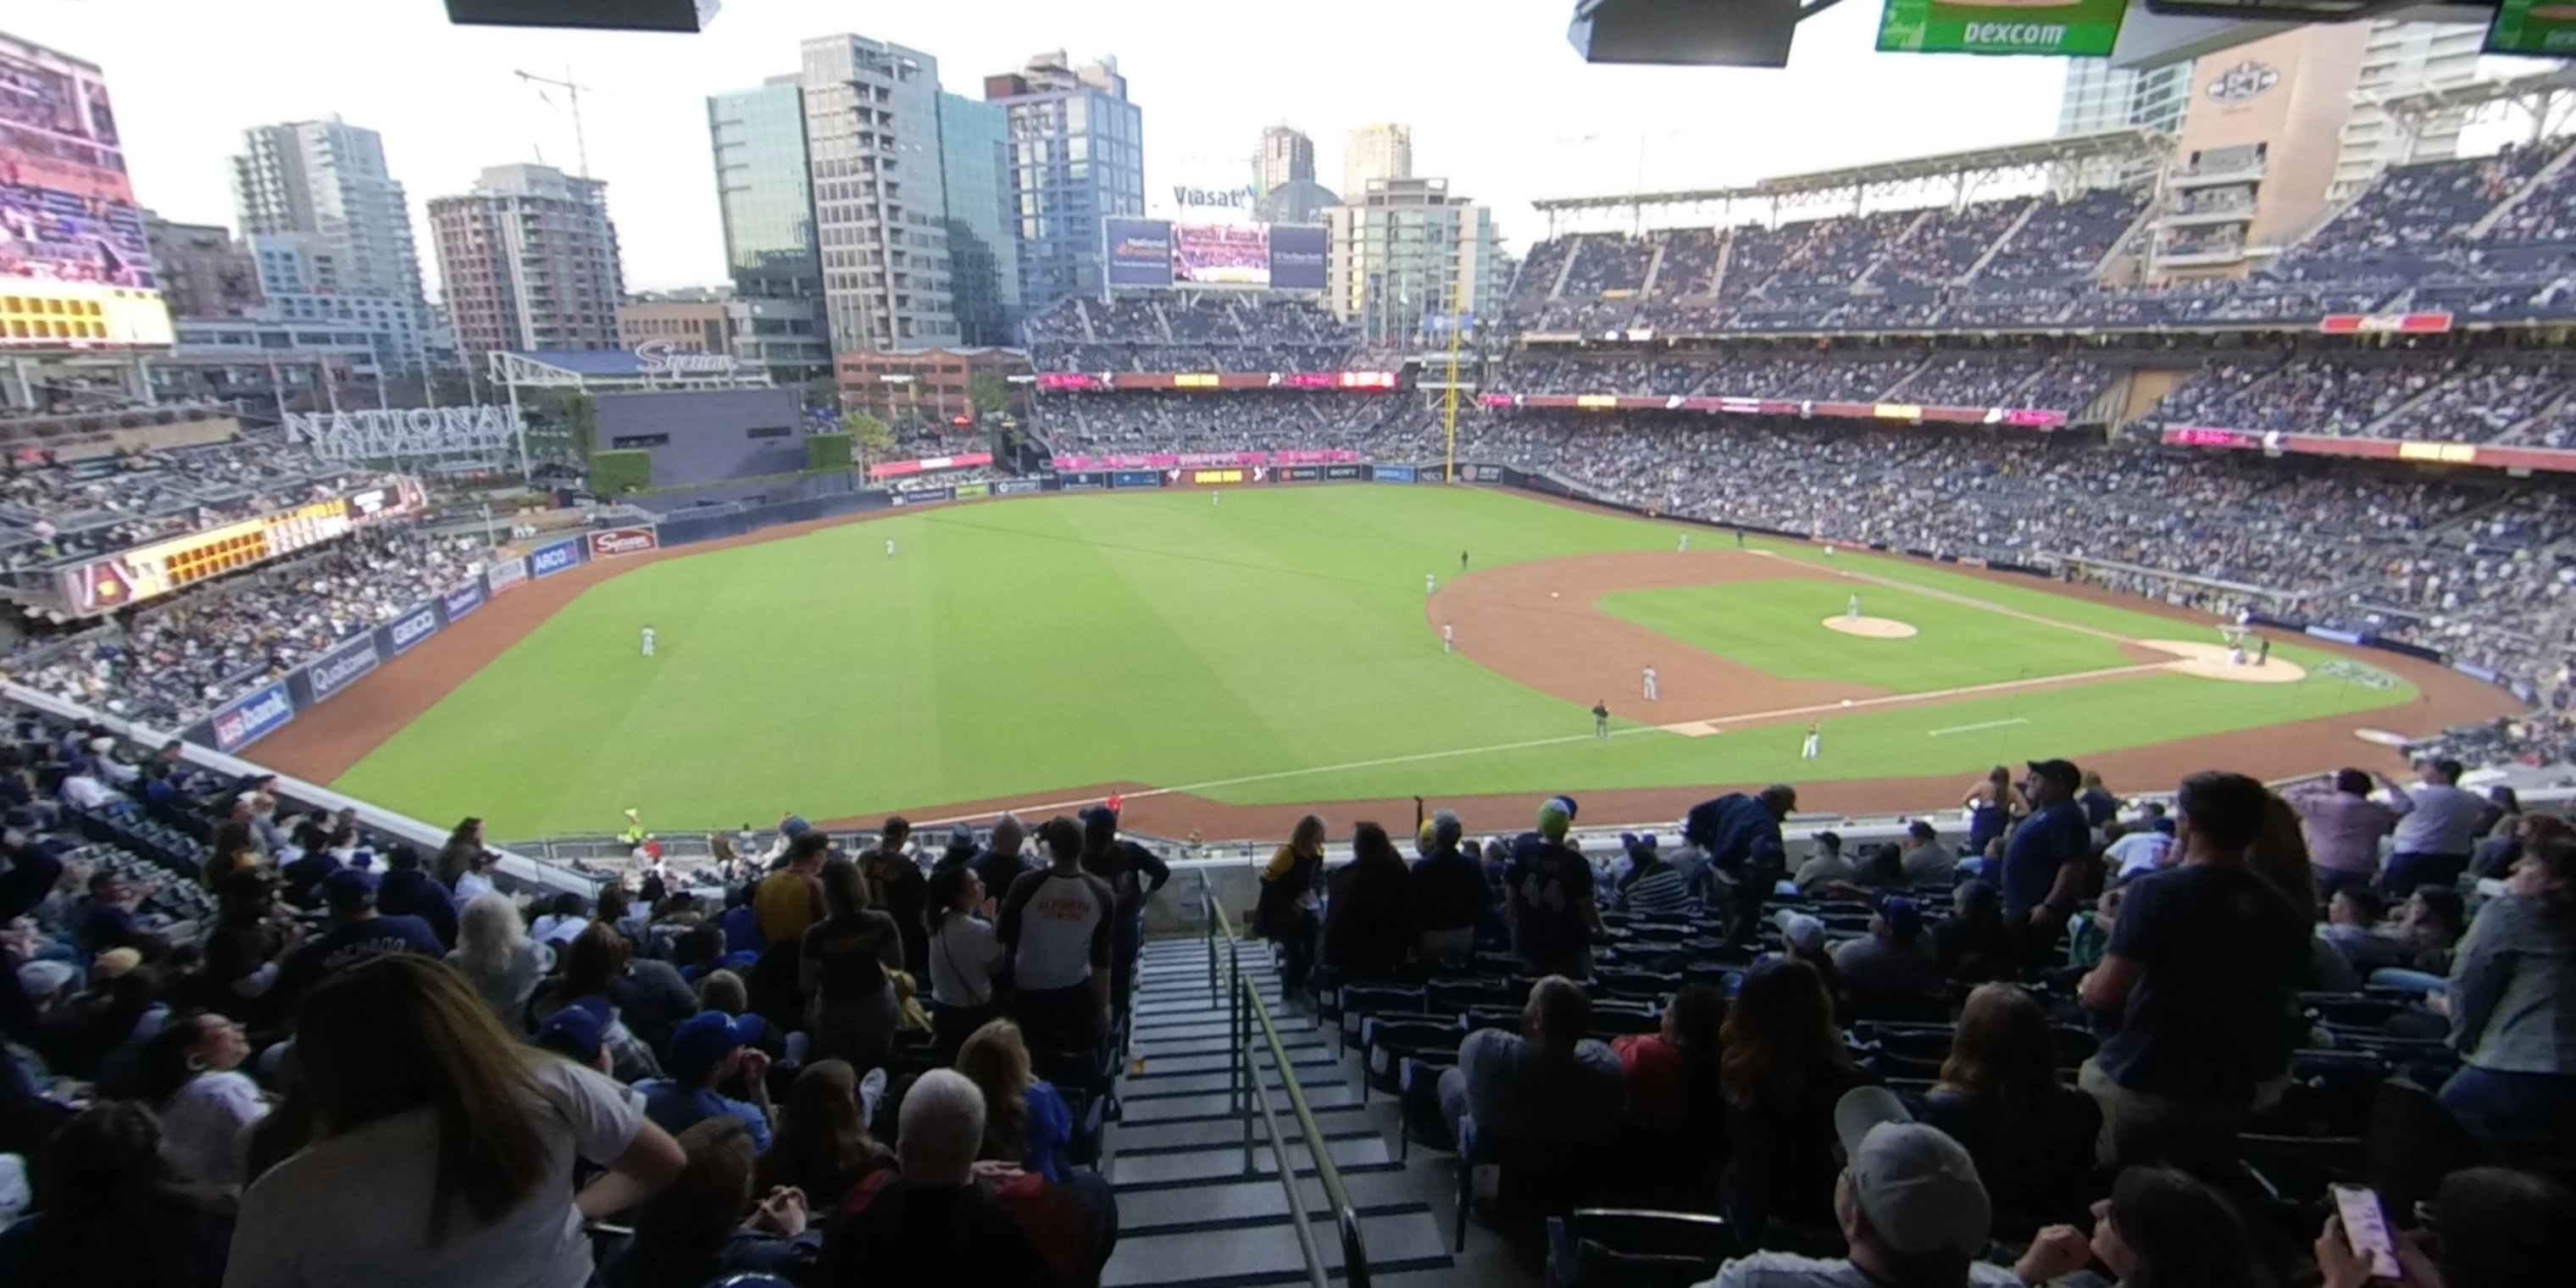 section 216 panoramic seat view  for baseball - petco park